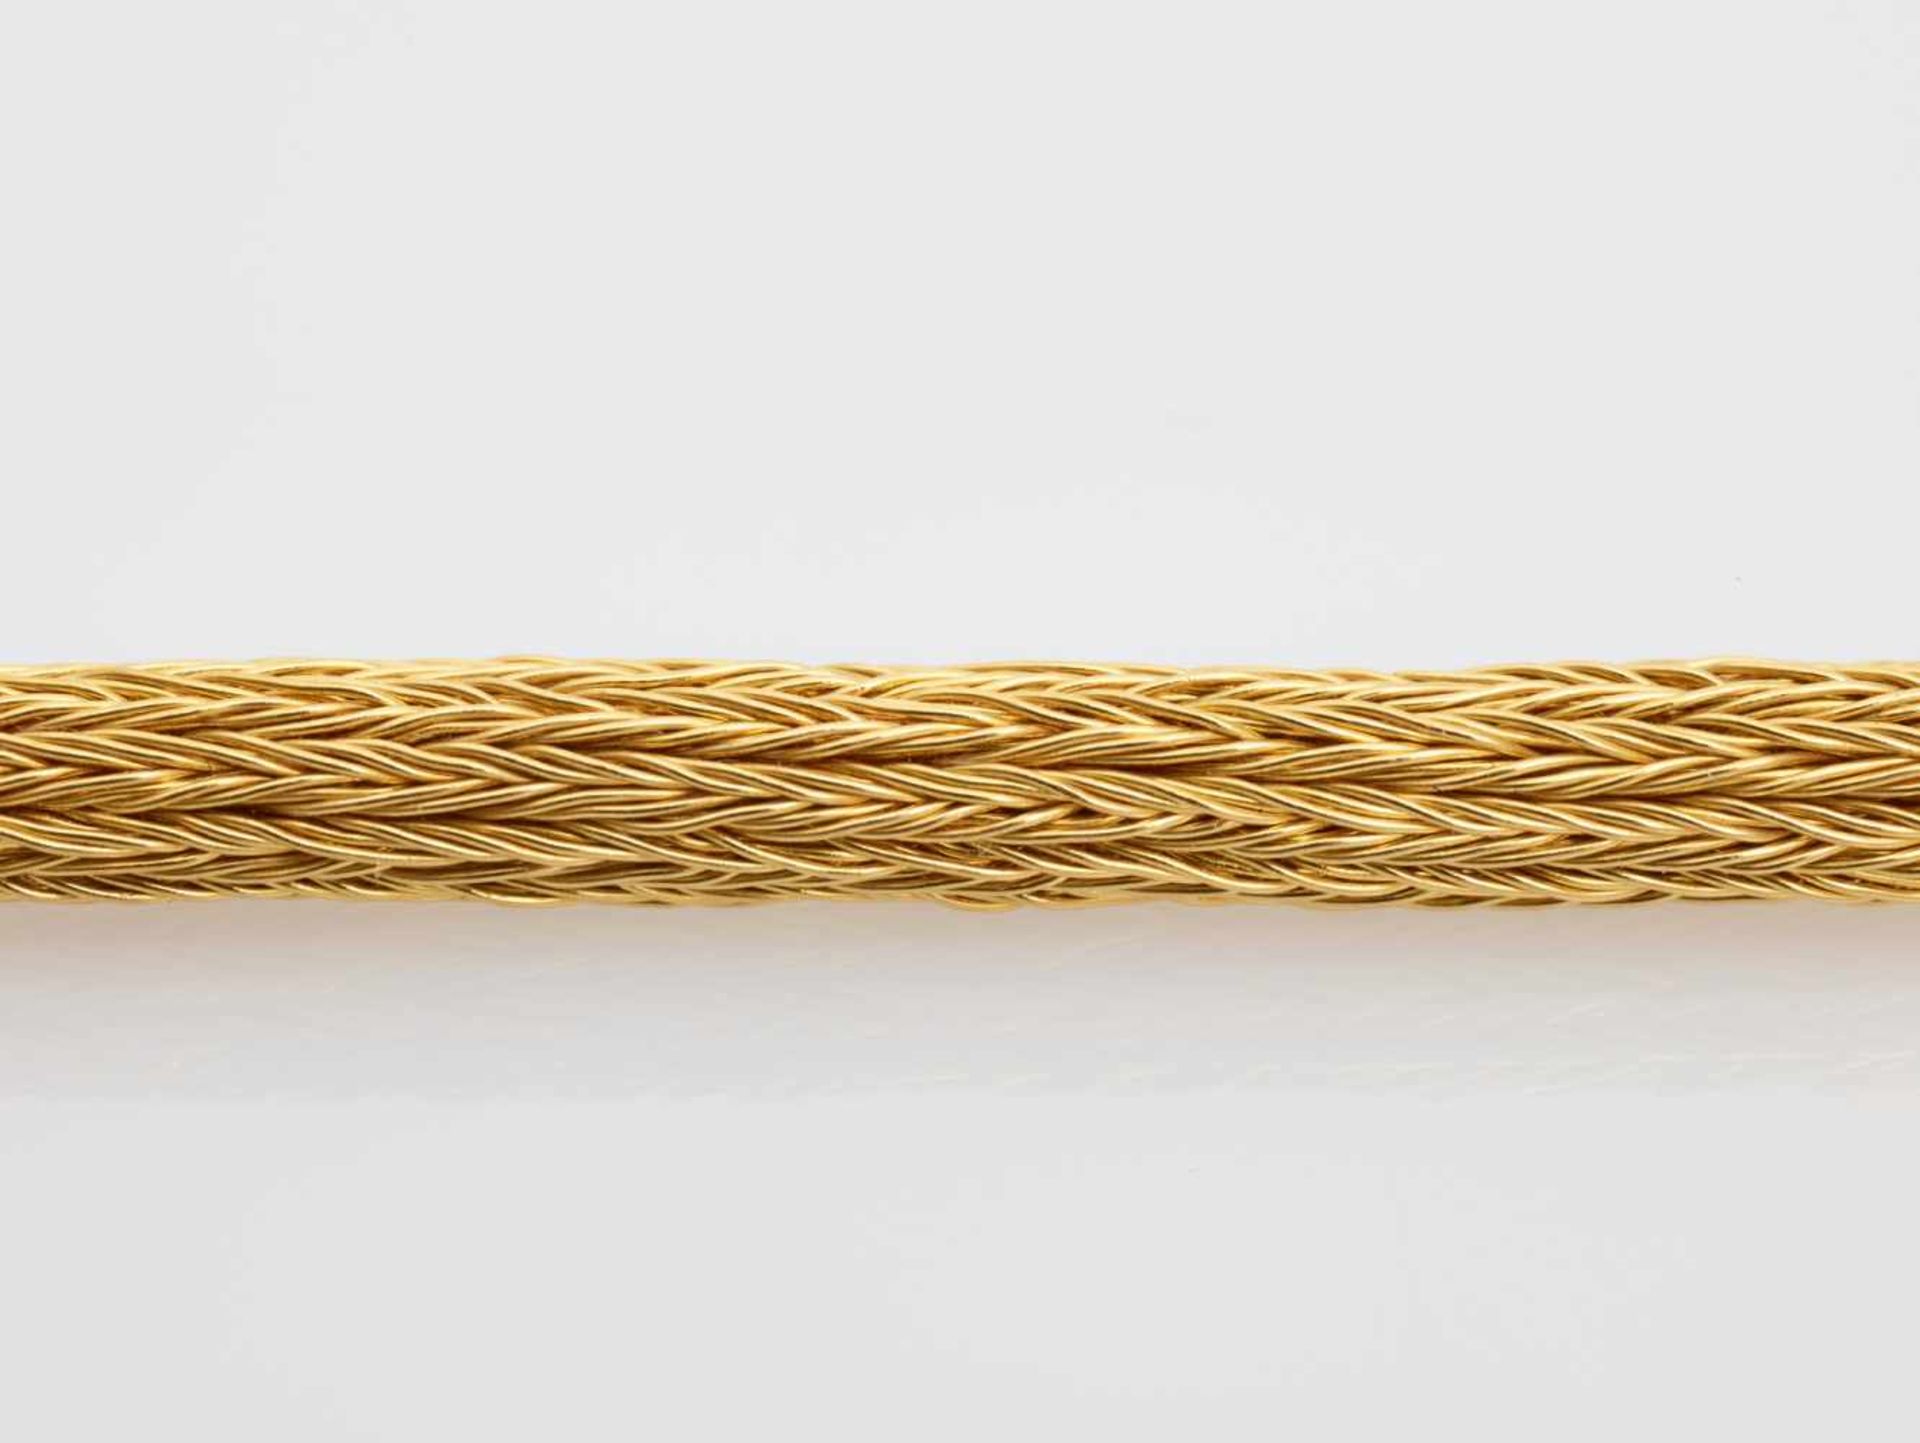 OTTO JAKOB (b. 1951), 18 CARAT GOLD HAND WOVEN FOXTAIL CHAIN WITH EXTENSION, 1987Germany1987, - Image 5 of 6